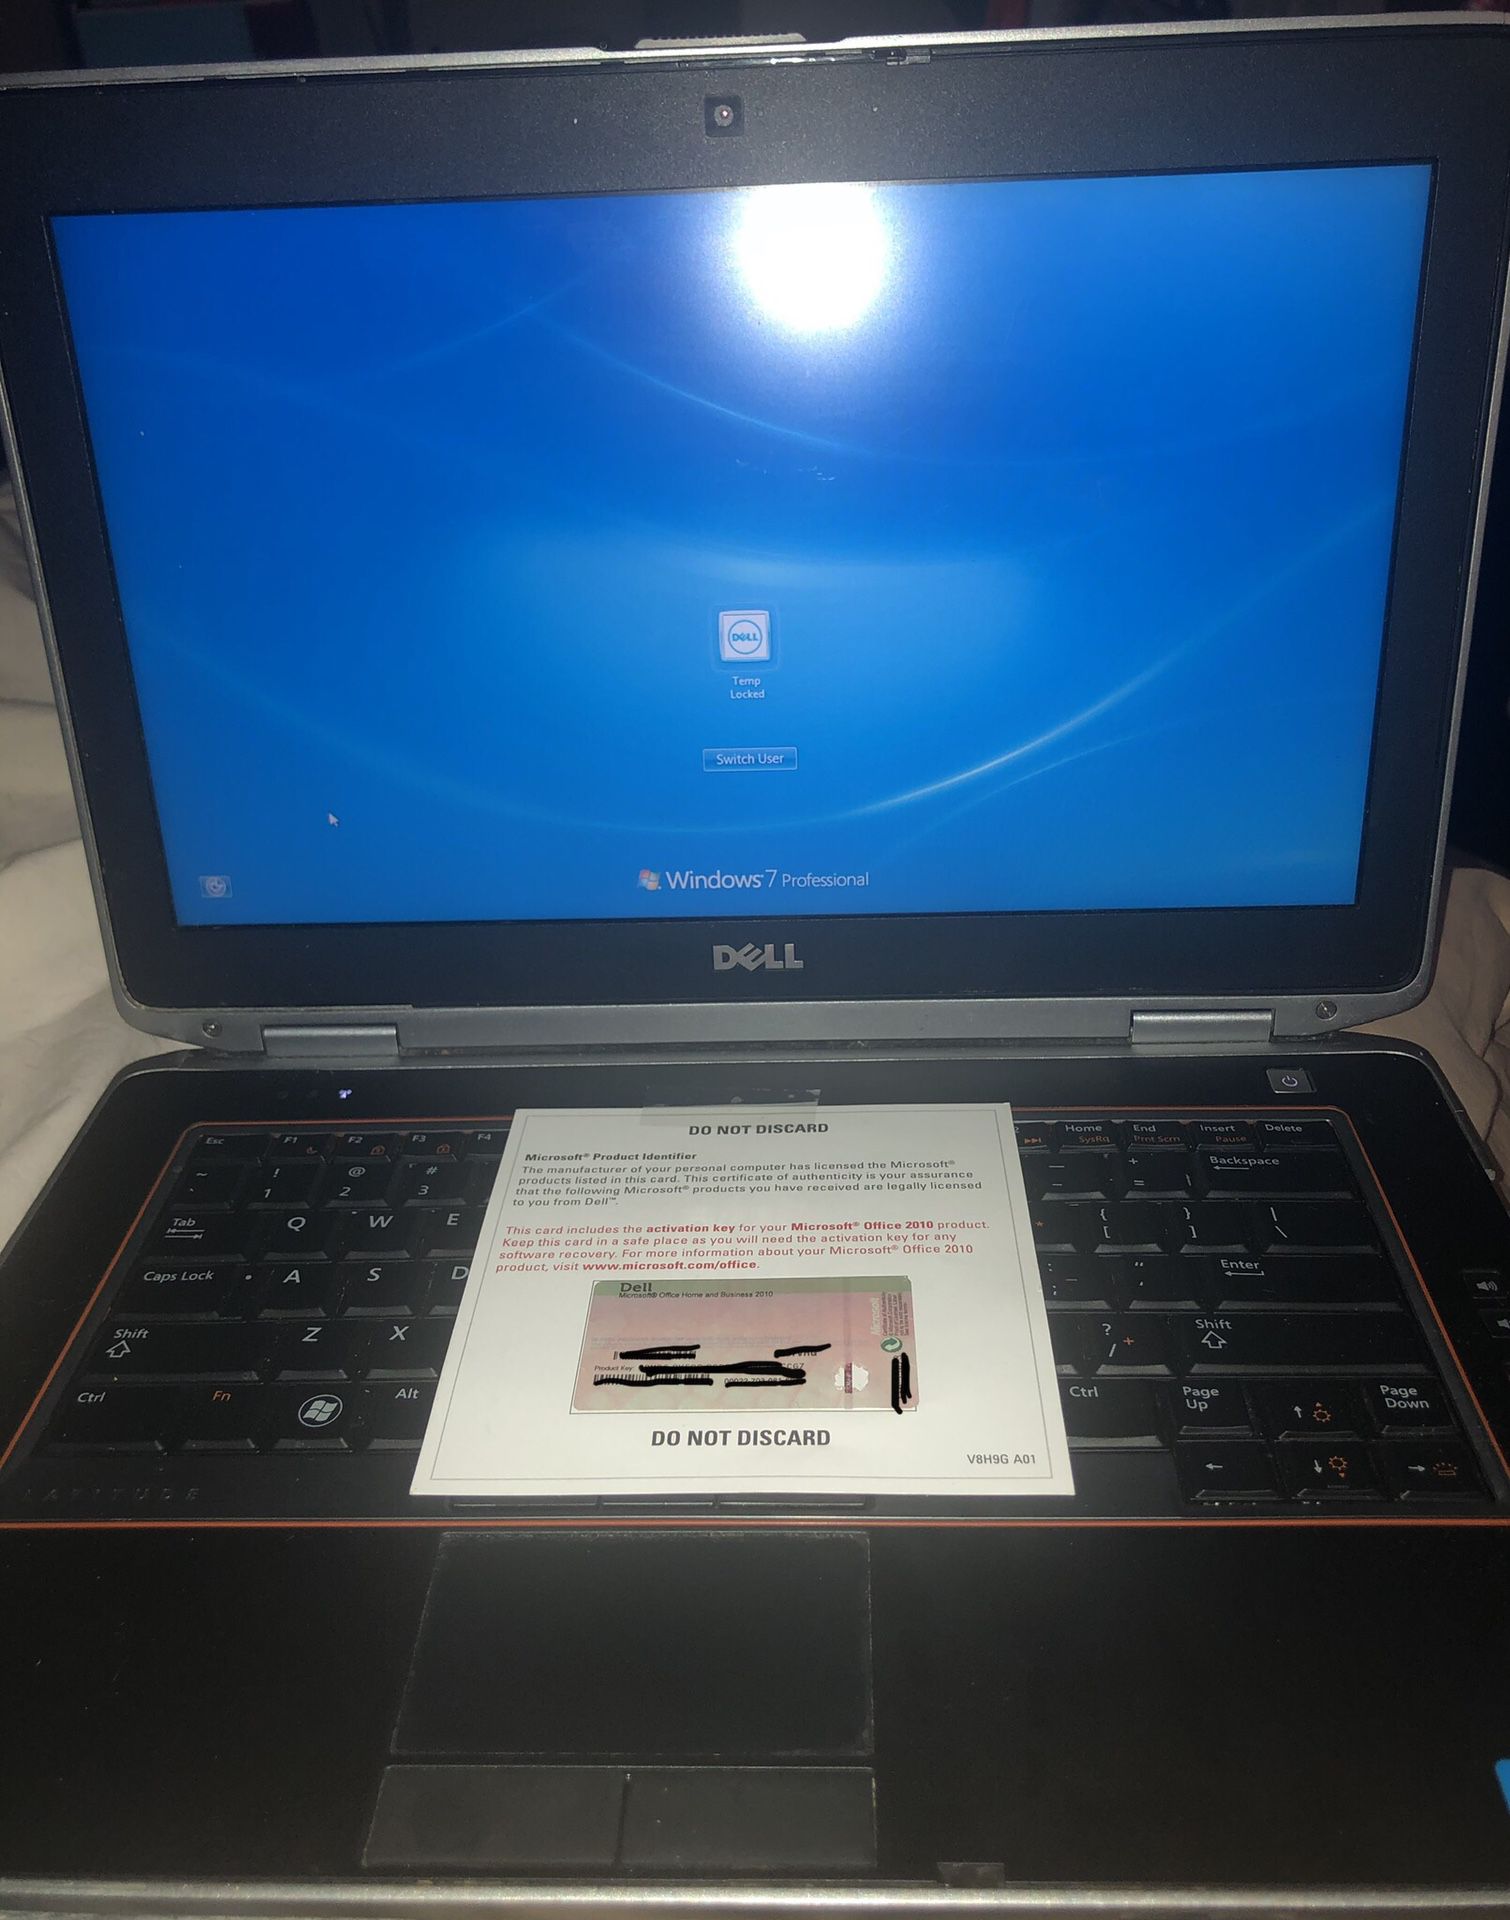 Dell Latitude E6420 14" i7 Core Duo 2, 2.70GHZ 4GB RAM 64bit operating system, Windows 7Pro & Office,Home,Business 2010, CD/DVR, WiFi, HD, Webcam, Aw